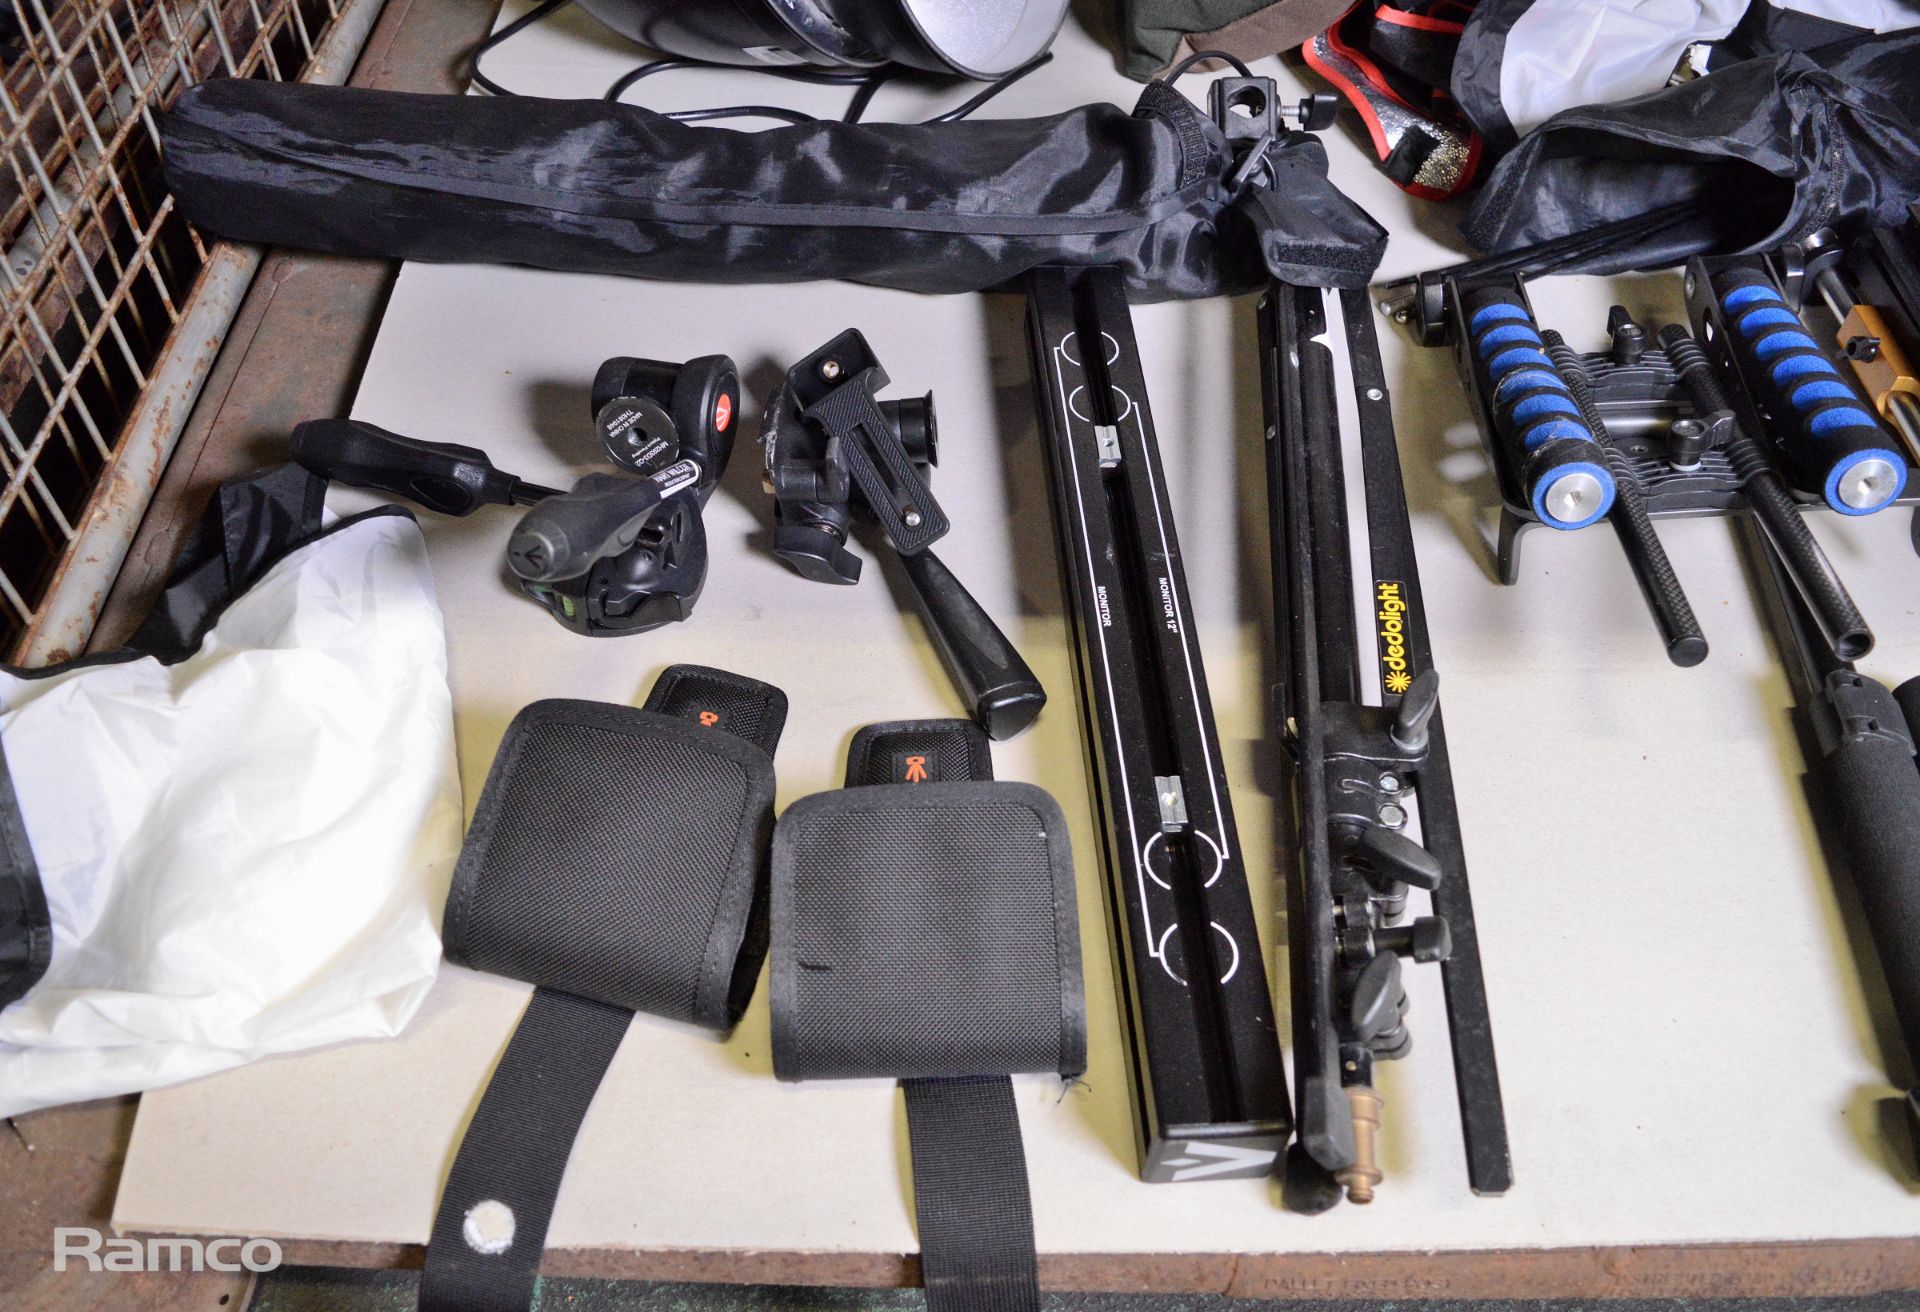 Photography spares and attachments, lighting equipment & camera mounts - Image 4 of 7